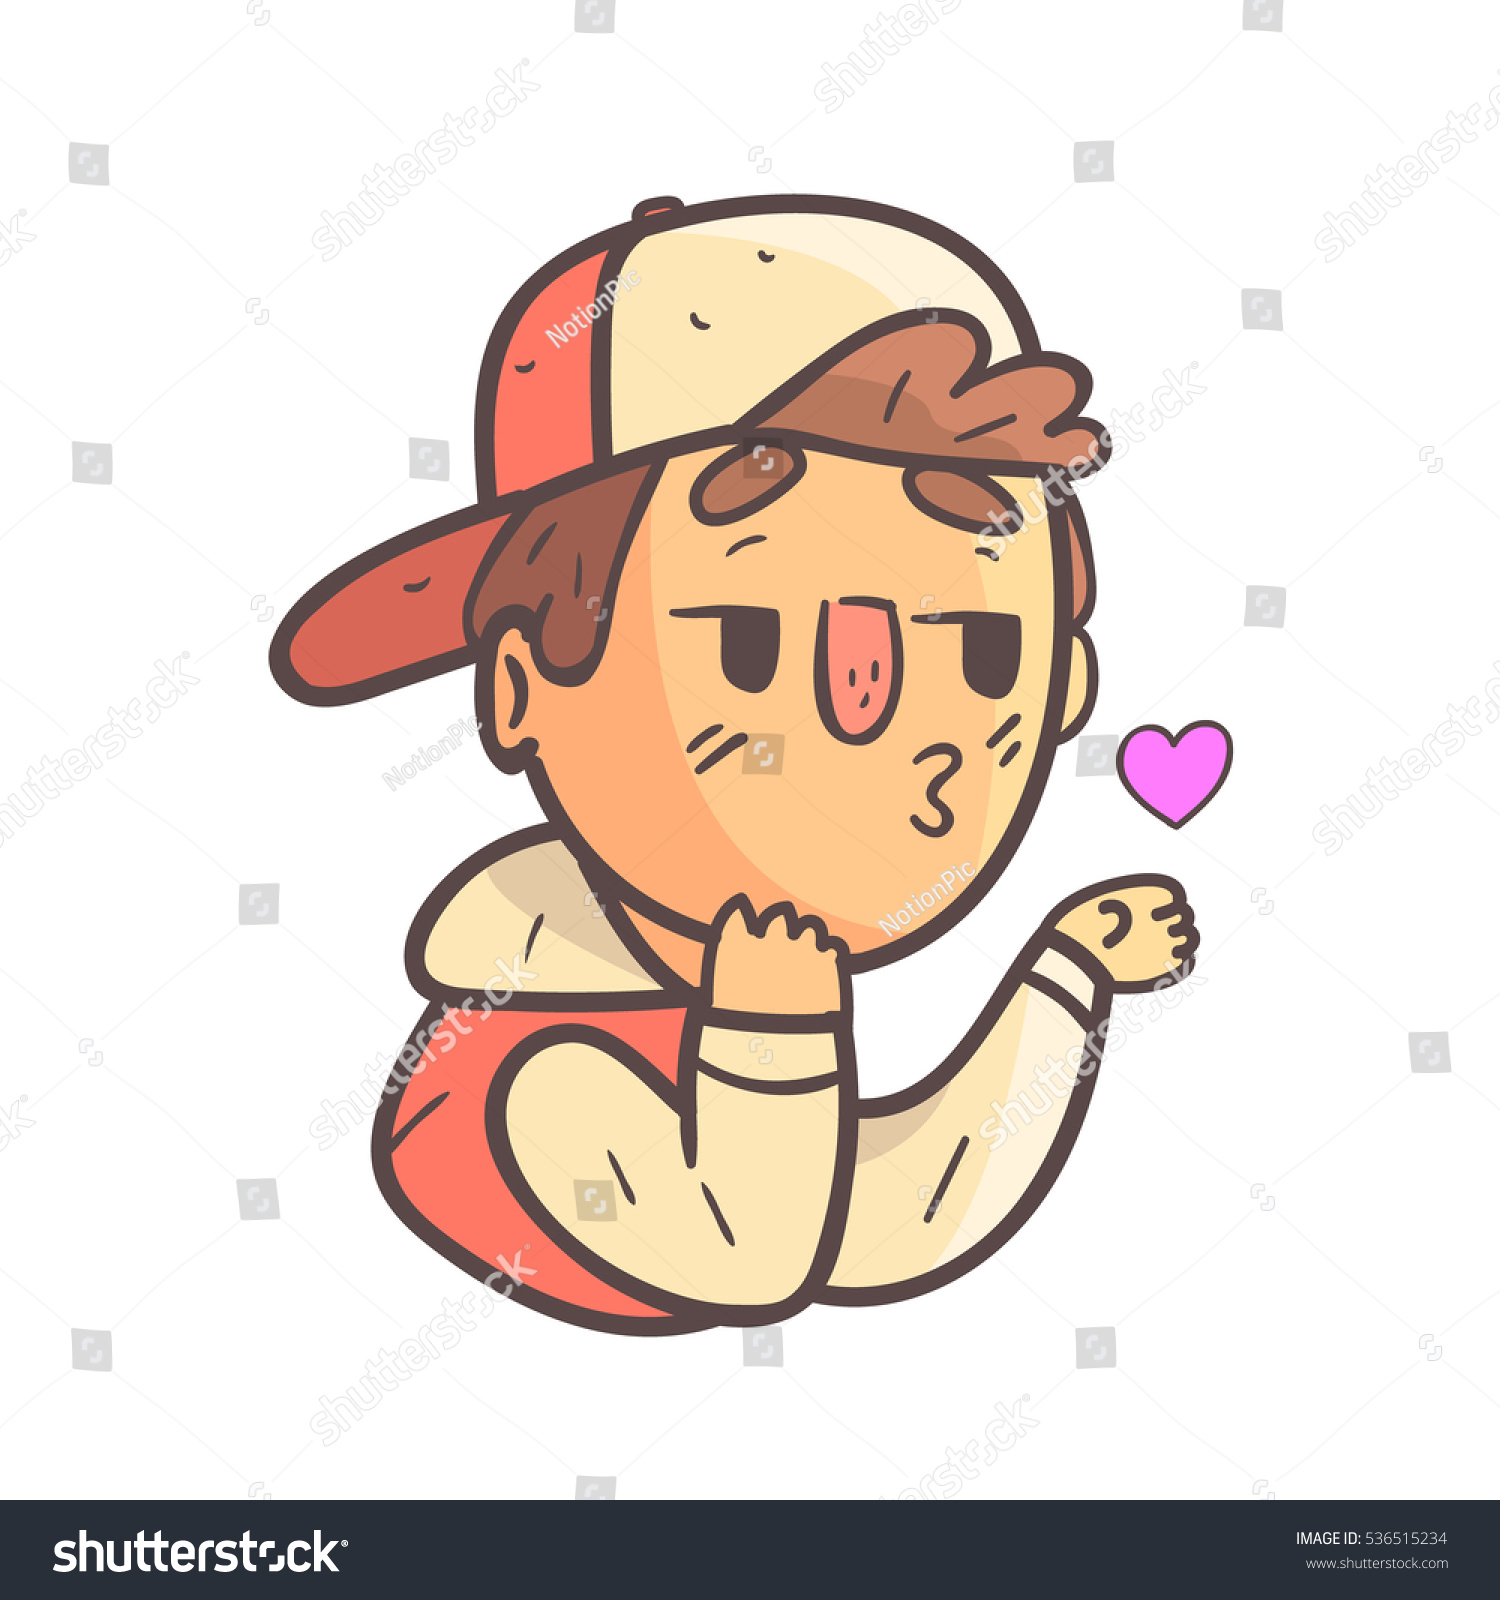 SVG of Kissing Boy In Cap And College Jacket Hand Drawn Emoji Cool Outlined Portrait svg